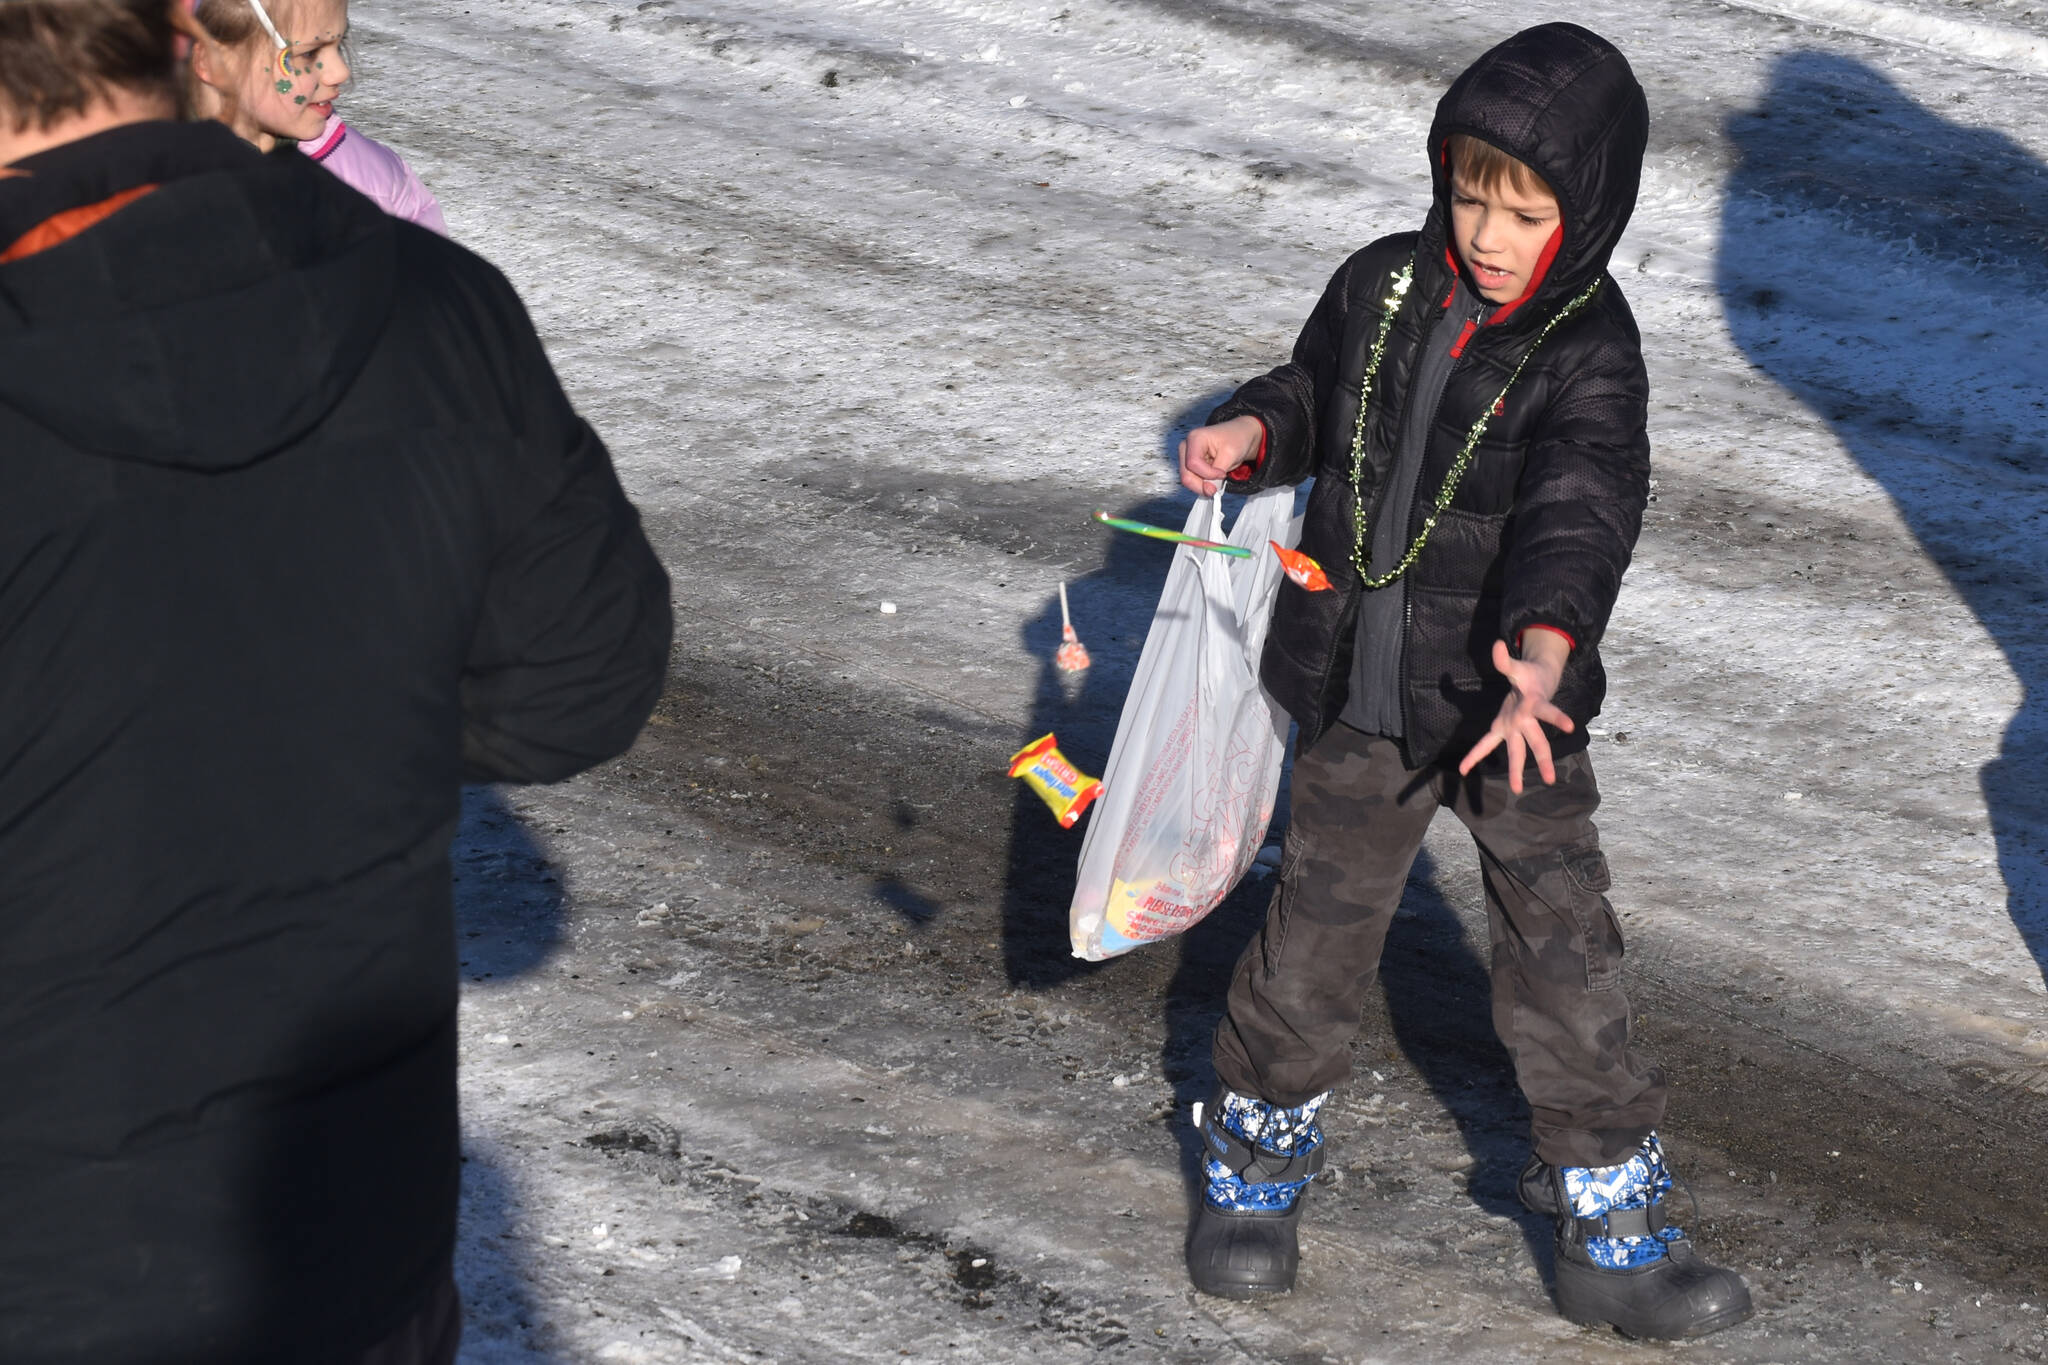 Candy is thrown as the 32nd annual Sweeney’s St. Patrick’s Day Parade proceeds down Fireweed Street in Soldotna, Alaska on Friday, March 17, 2023. (Jake Dye/Peninsula Clarion)